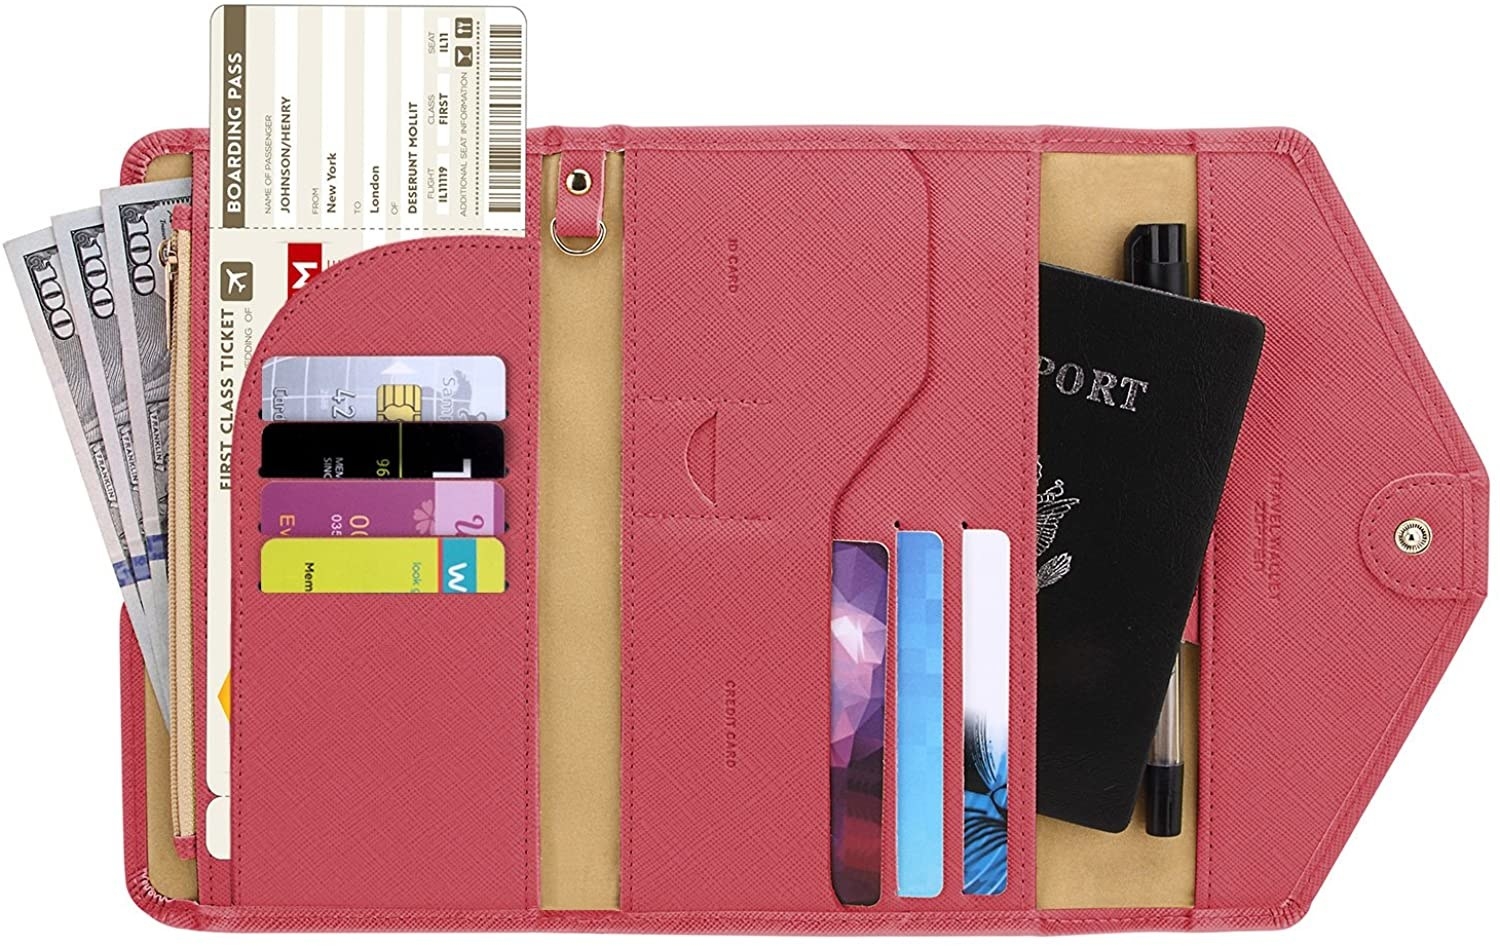 pink RFID-blocking travel wallet with bills, boarding pass, credit cards, and passport